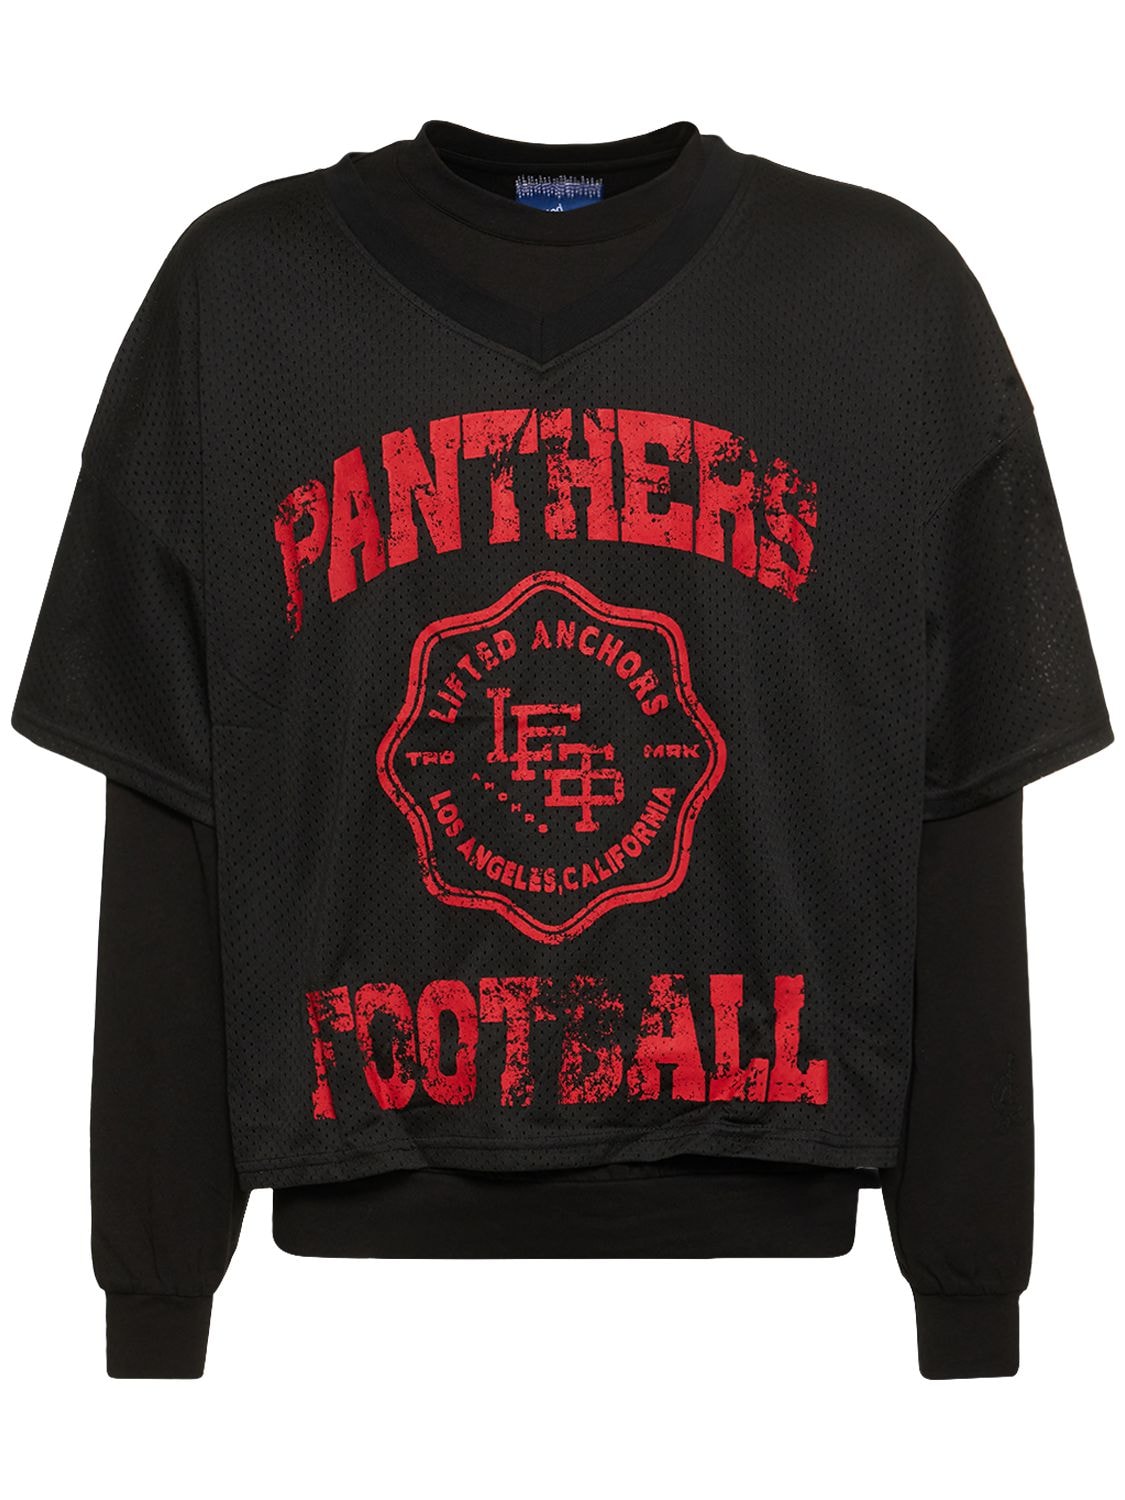 LIFTED ANCHORS Panther 2-piece Jersey & Sweatshirt